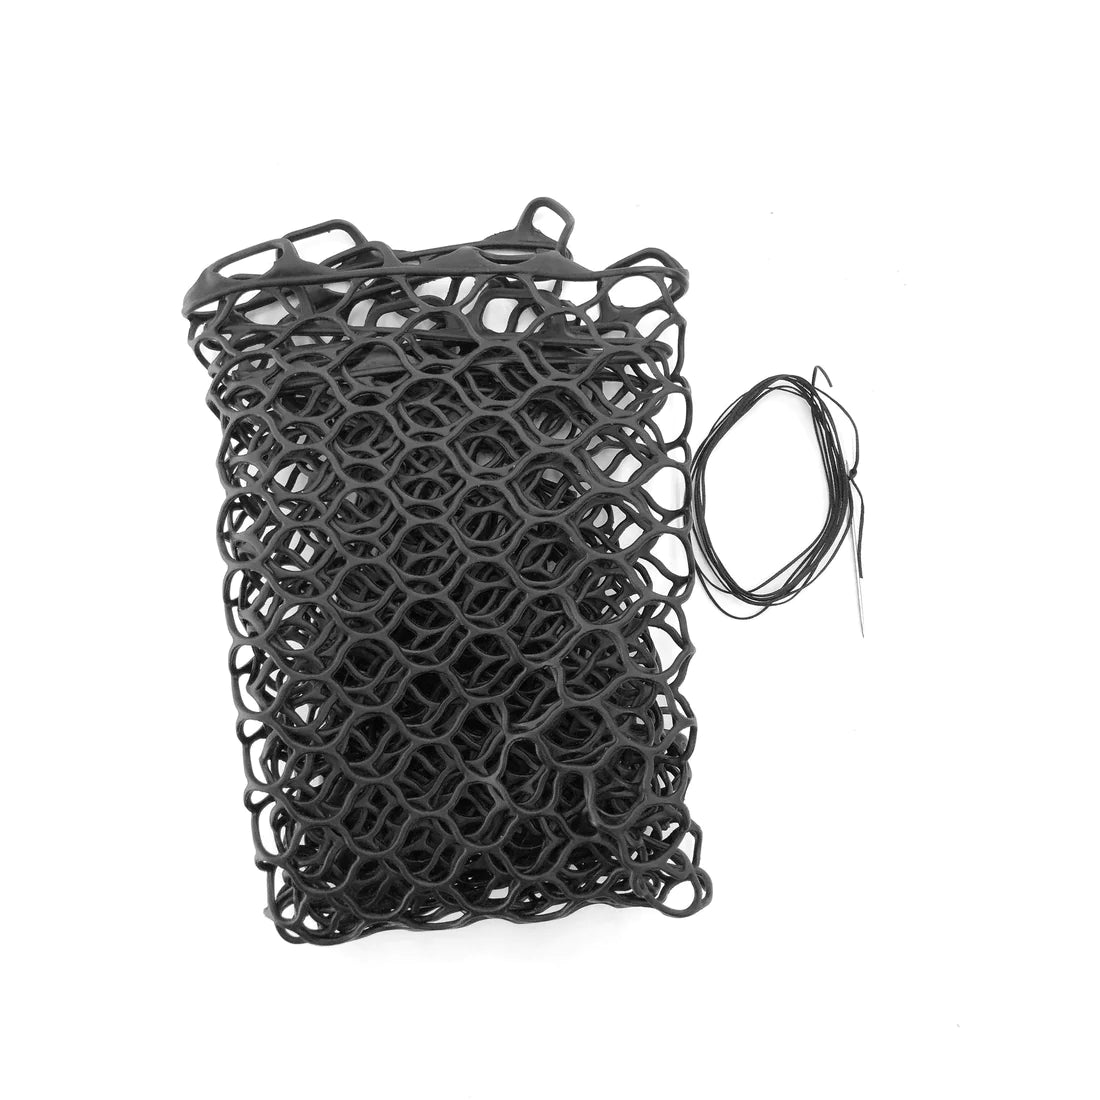 Fishpond Replacement Net - Conejos River Anglers